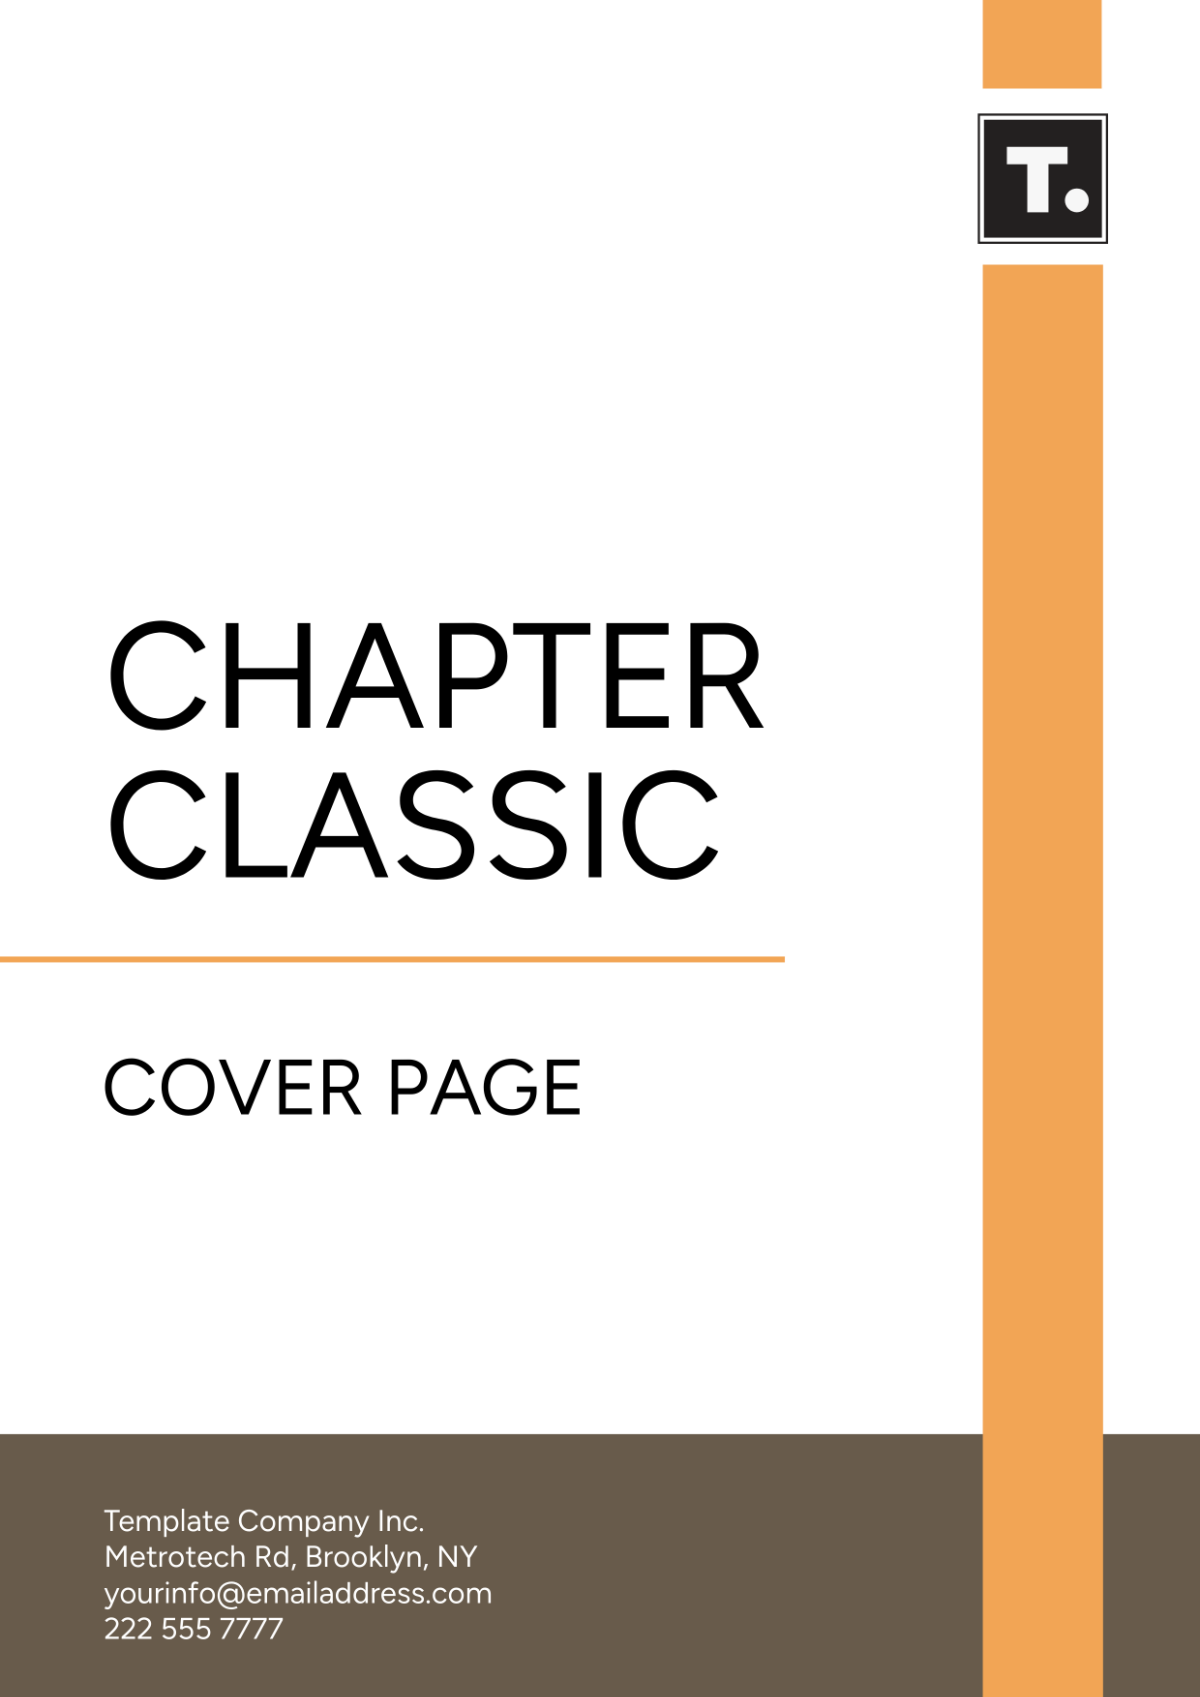 Chapter Classic Cover Page